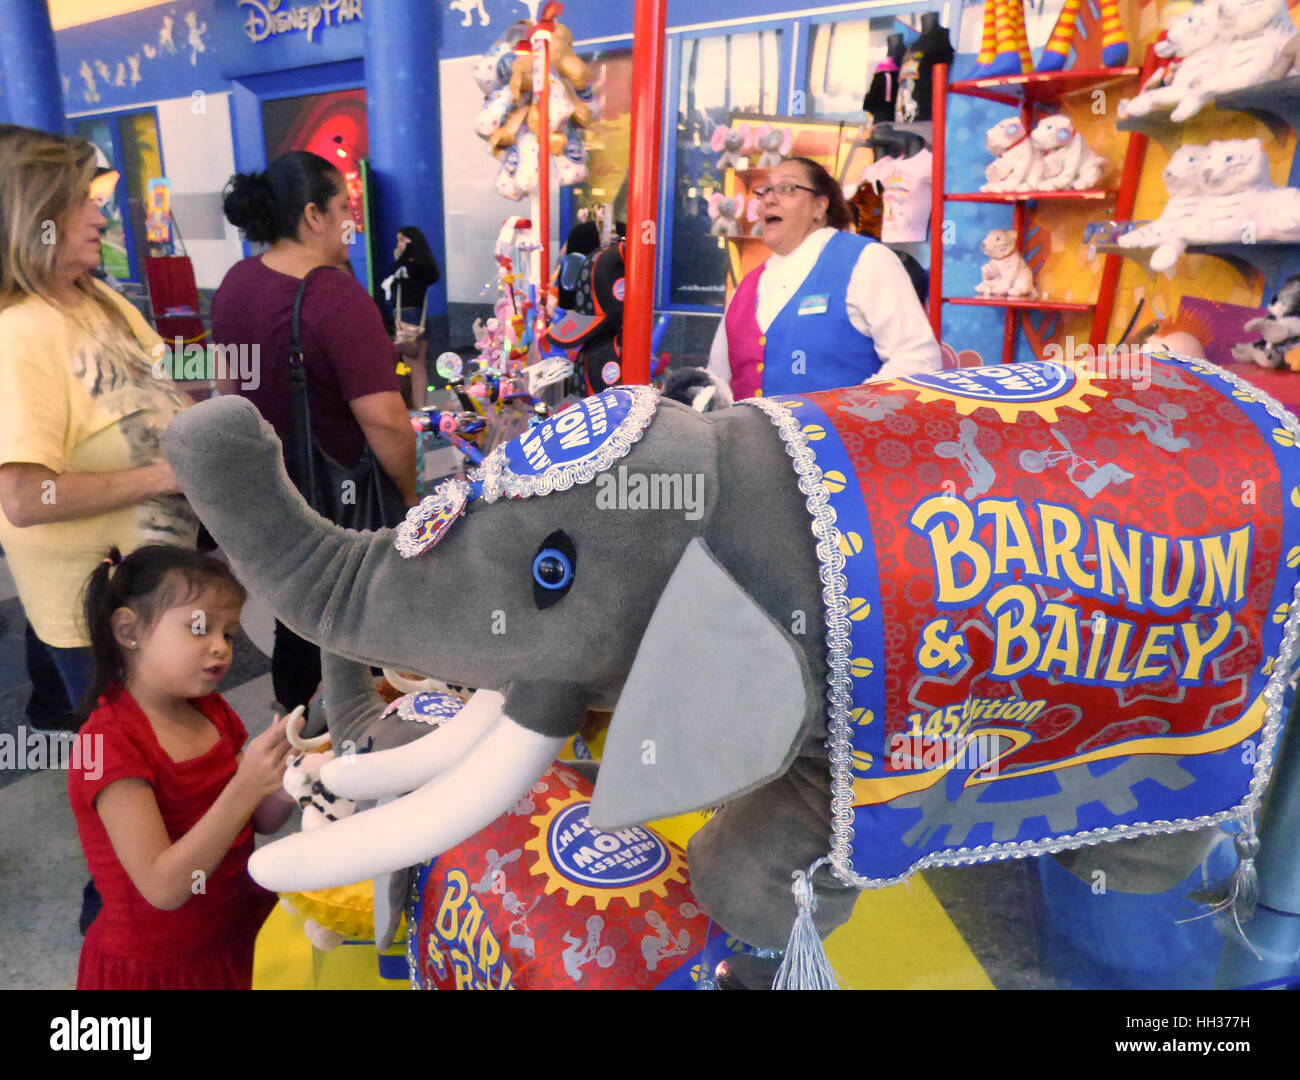 Orlando, USA. 16th January, 2017. People buy souvenirs at the Amway Center in Orlando, Florida after attending the final Orlando performance of the Ringling Brothers and Barnum and Bailey Circus. The circus announced on January 14, 2017 that it will have its final performance in May after a 146-year run, citing declining attendance and high operating costs. Credit: Paul Hennessy/Alamy Live News Stock Photo